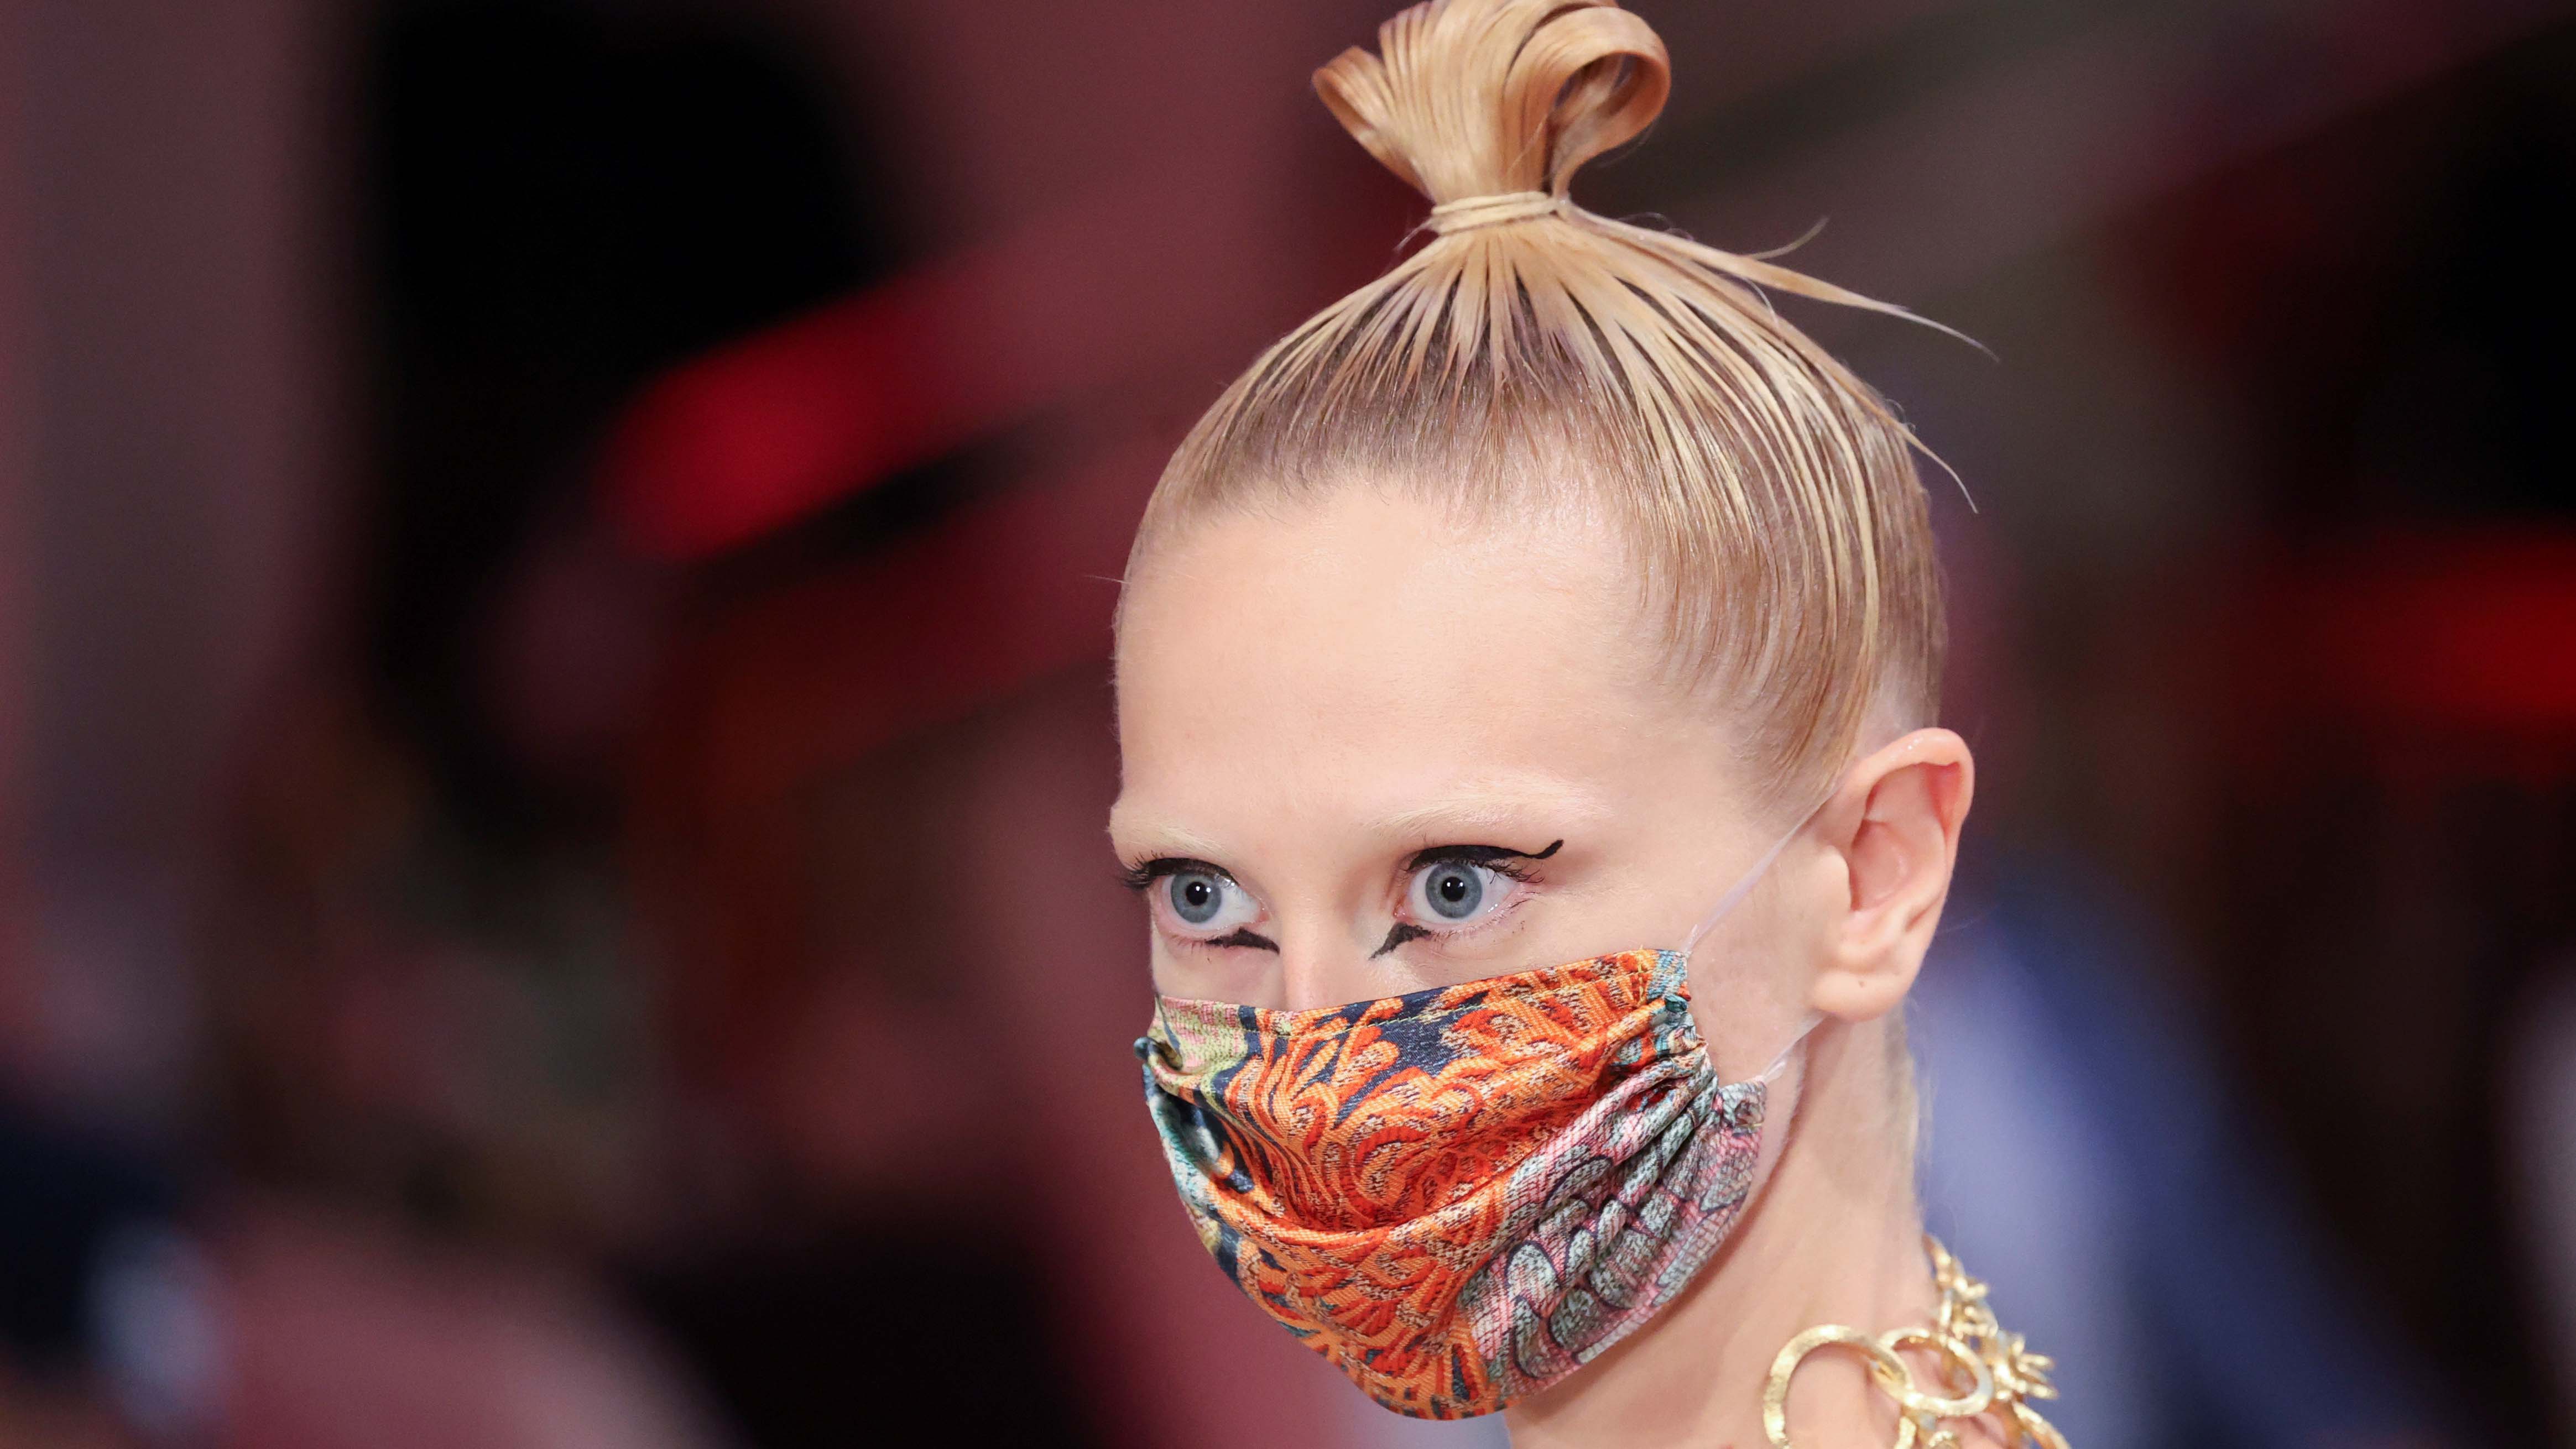 Masks have gone from a necessity to a fashion statement